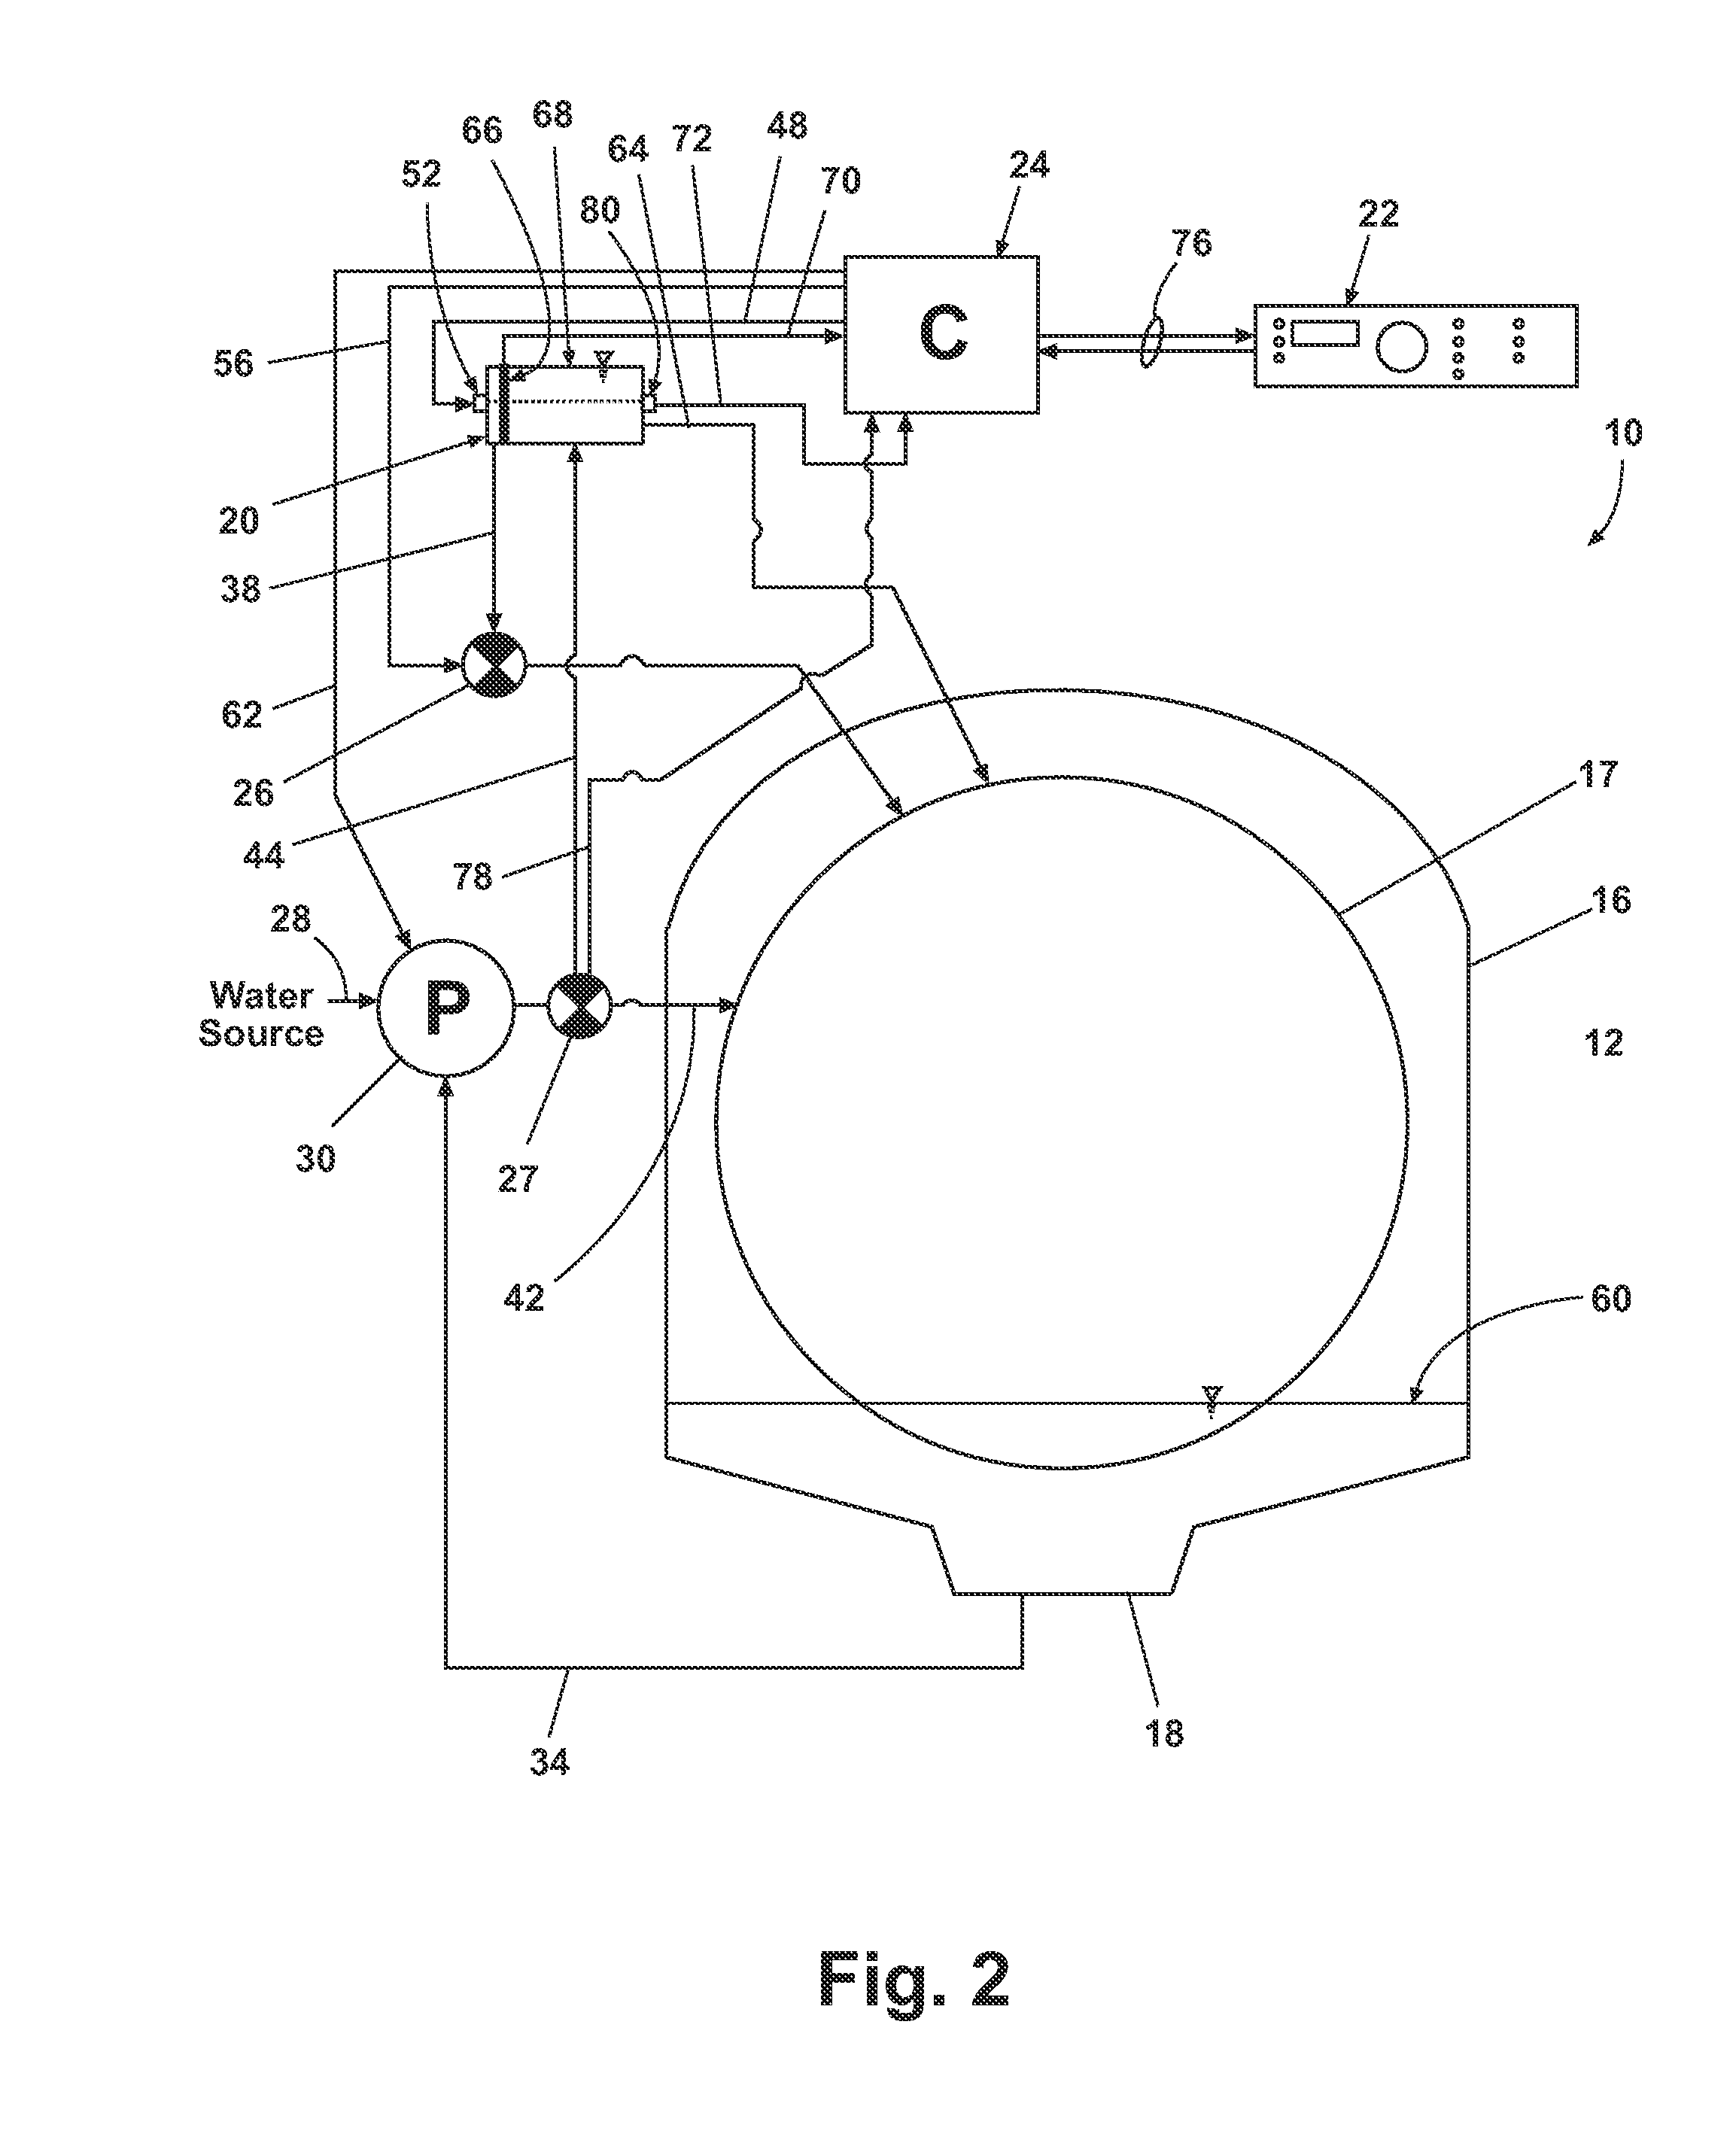 Apparatus and method for controlling laundering cycle by sensing wash aid concentration